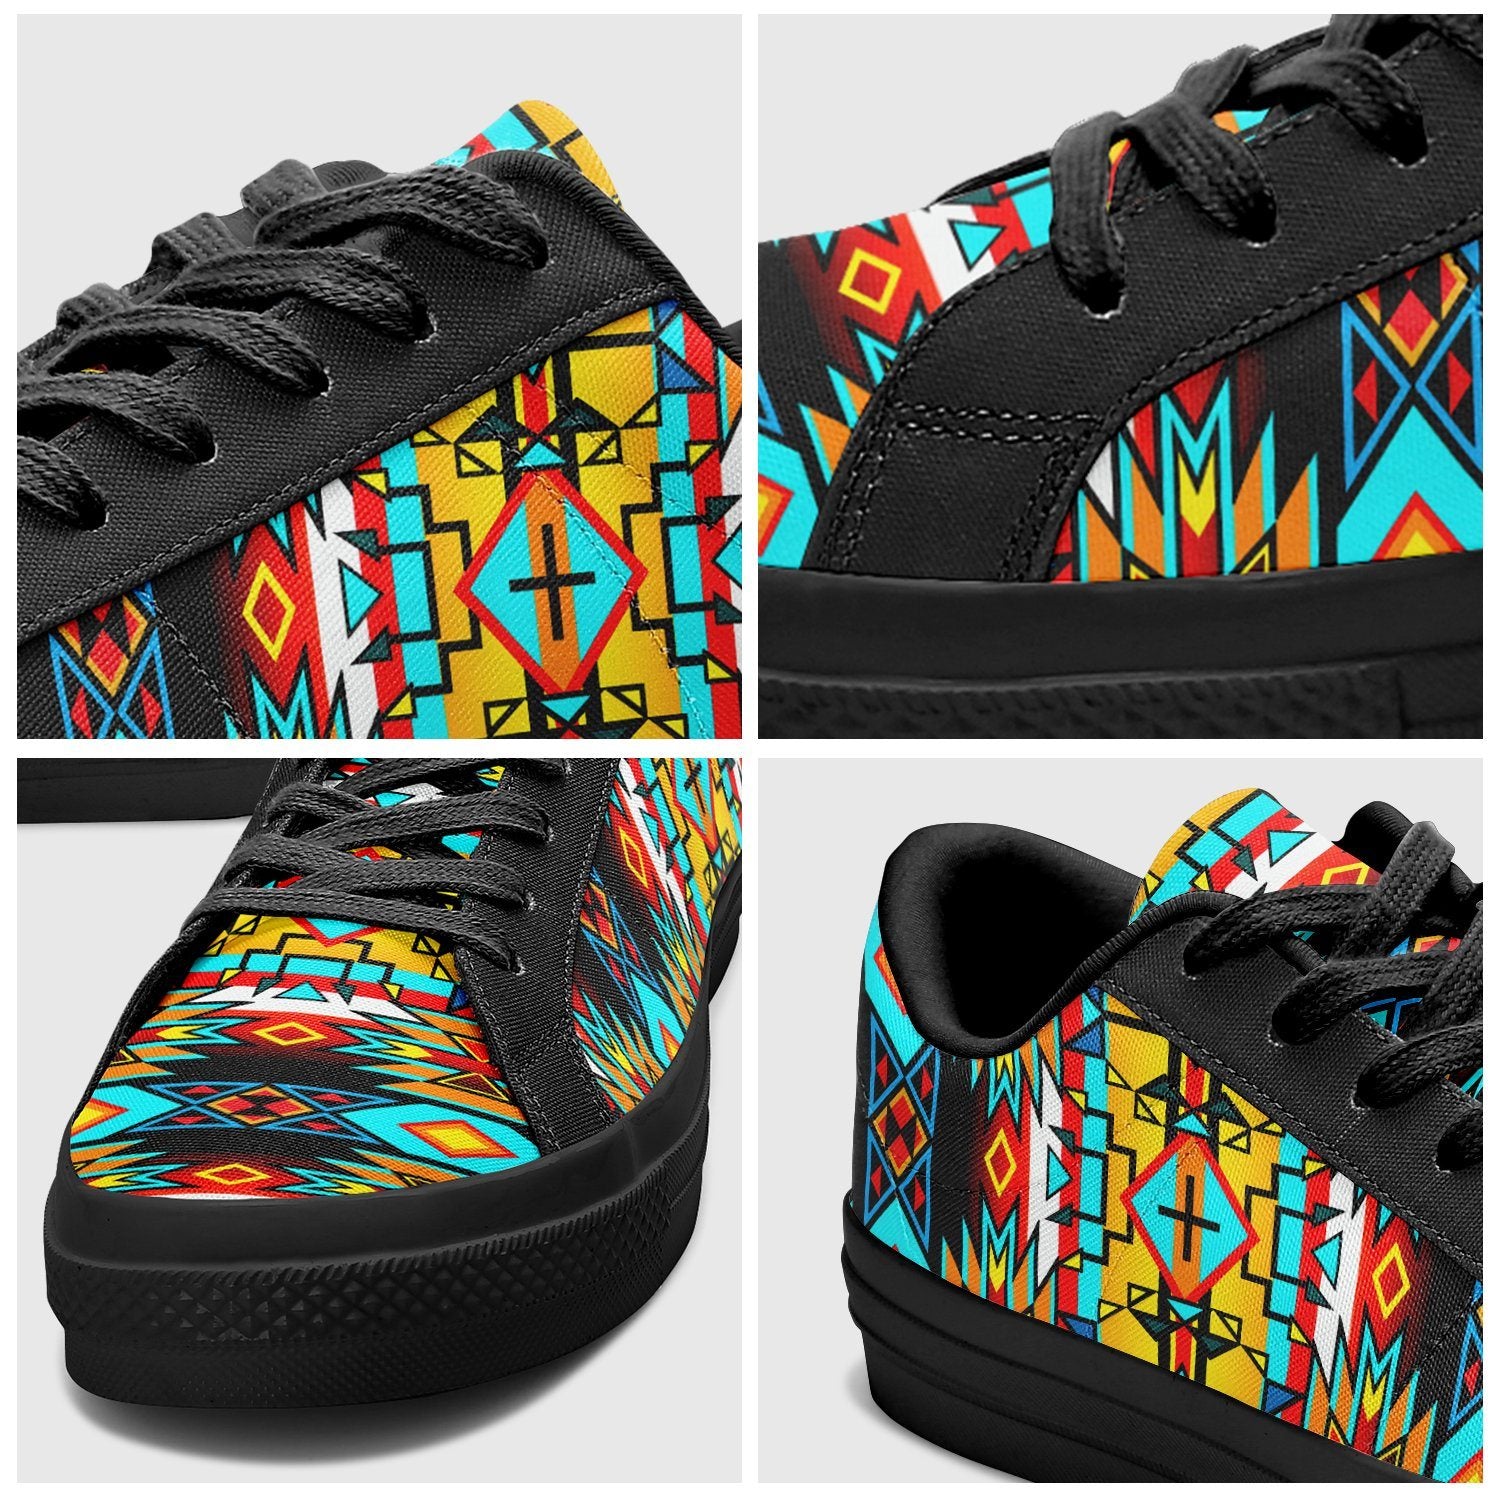 Force of Nature Twister Aapisi Low Top Canvas Shoes Black Sole 49 Dzine 